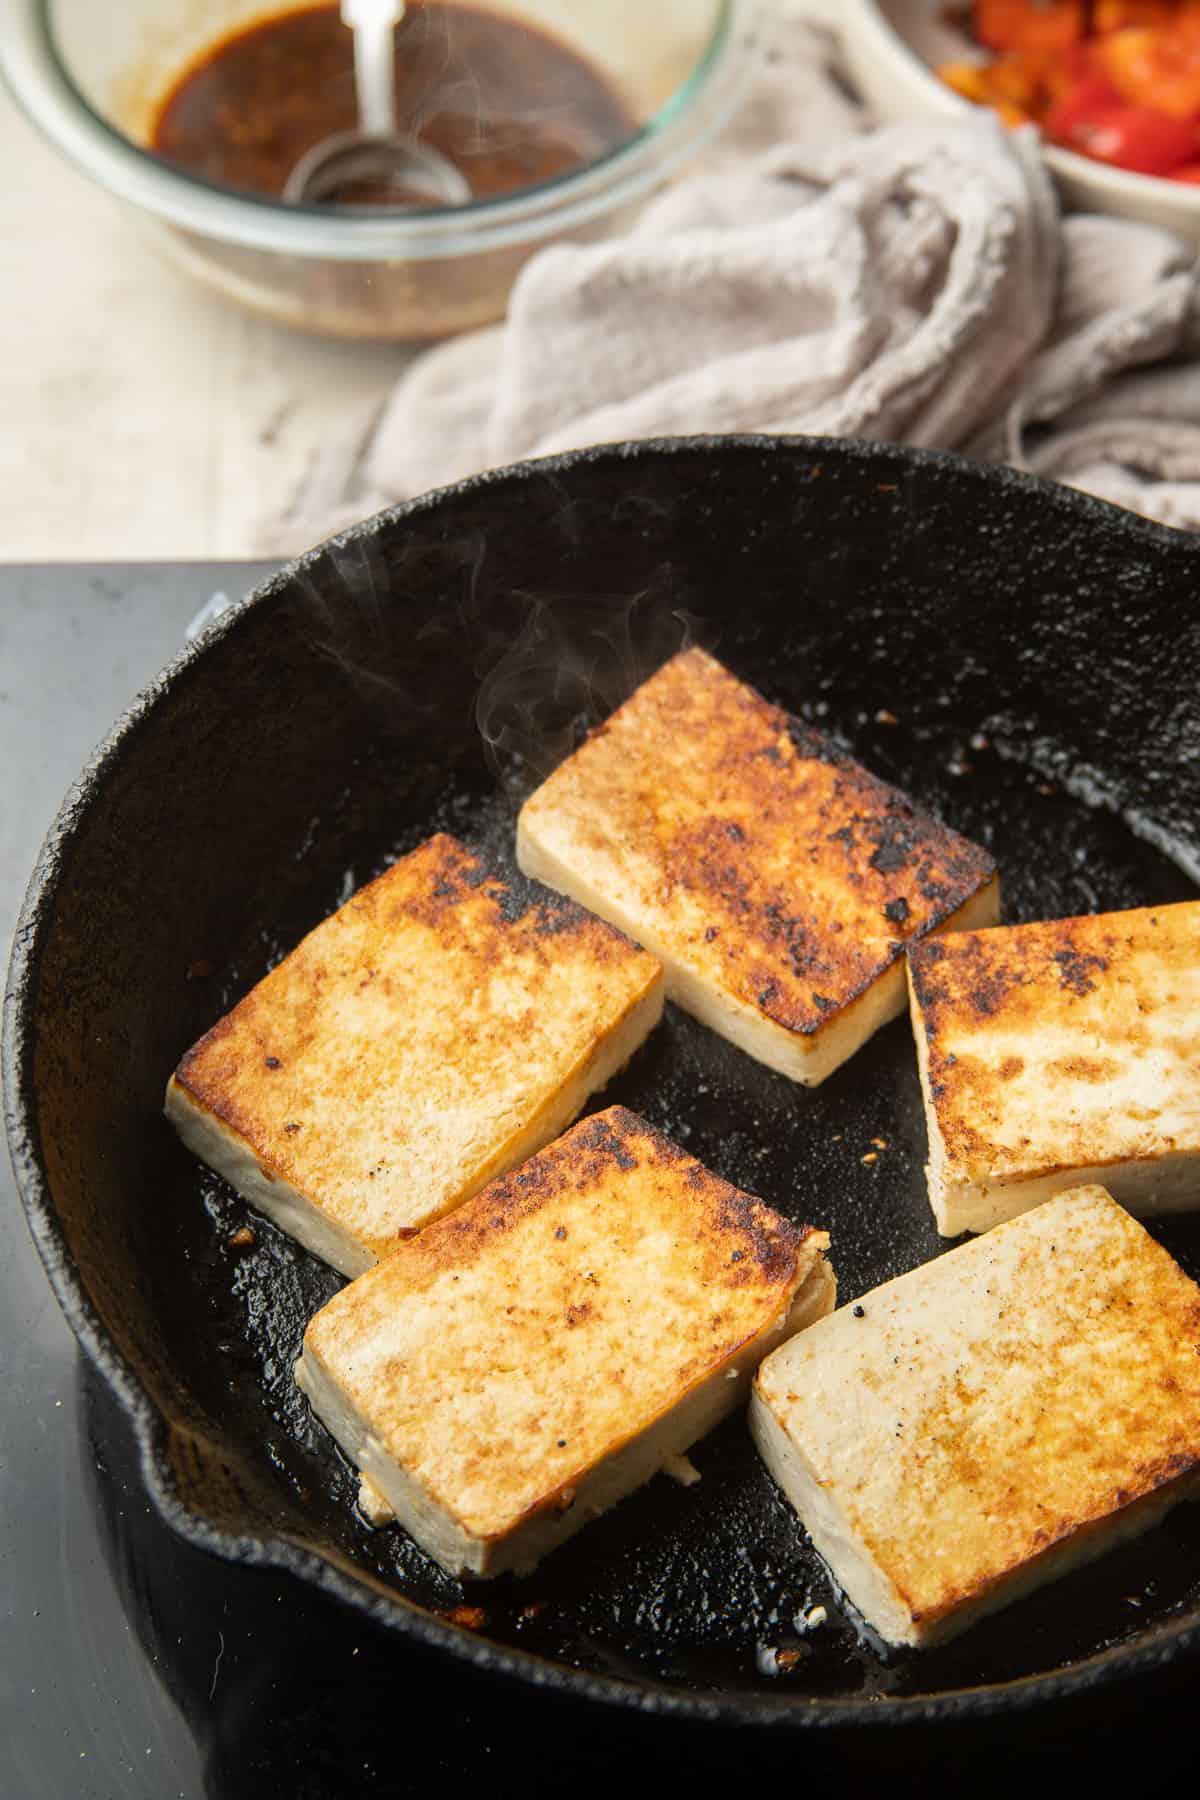 Tofu slabs cooking in a skillet, showing browning on their tops.